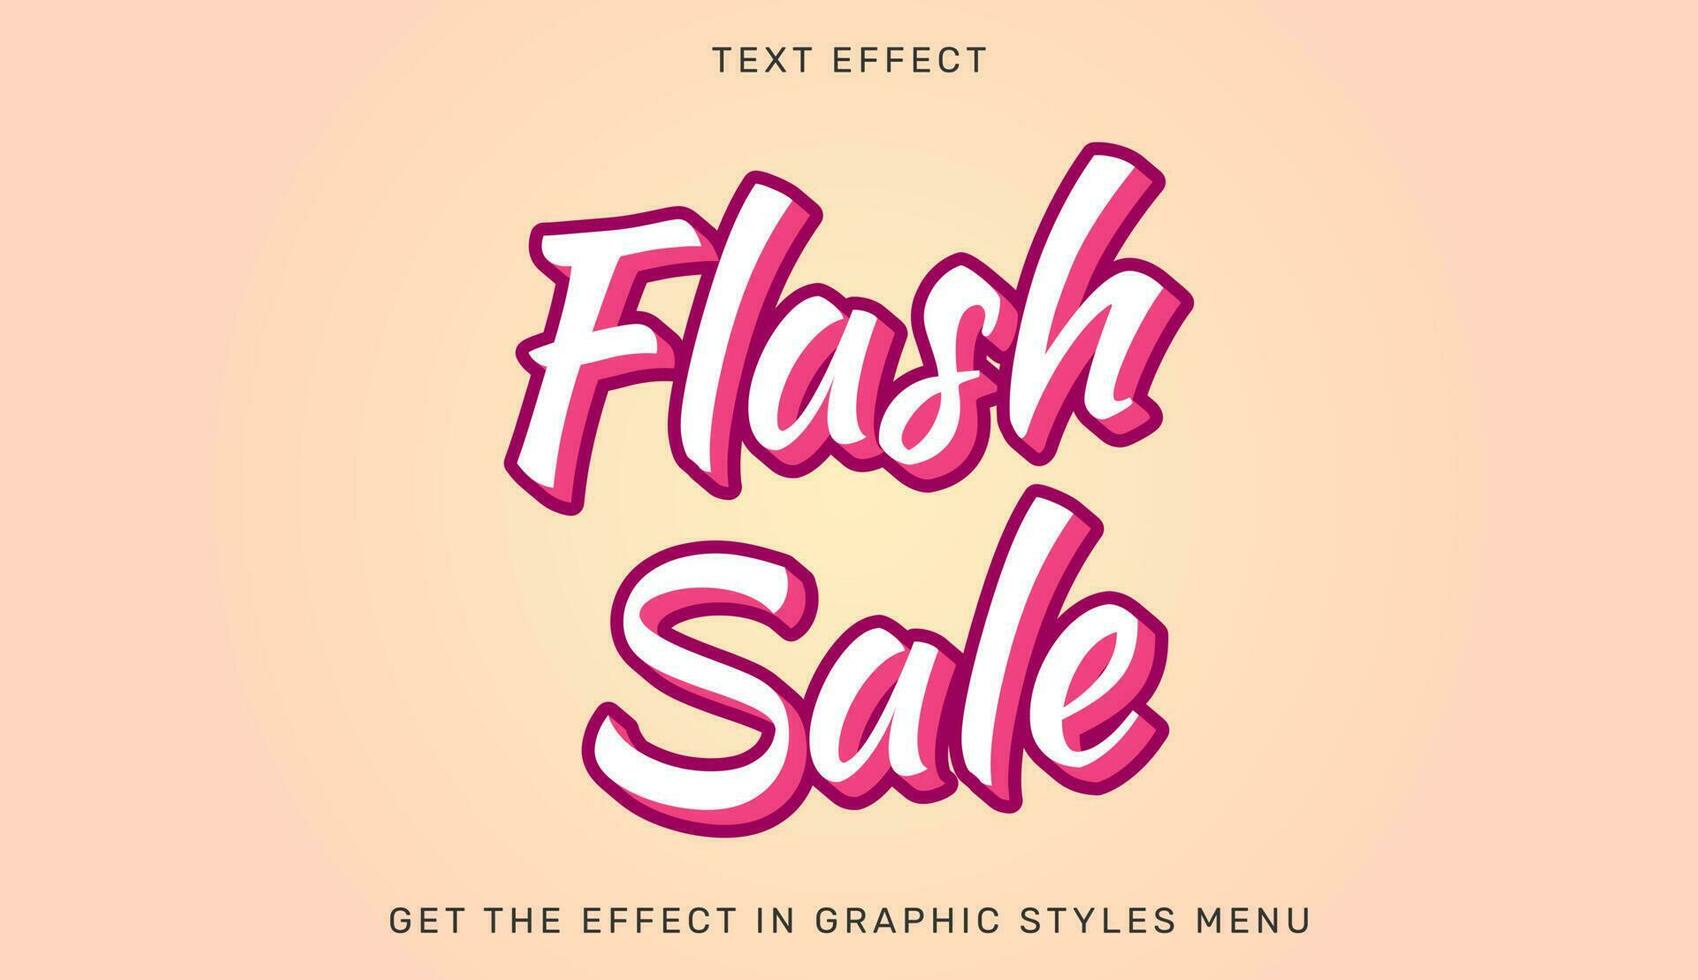 Flash sale editable text effect in 3d style vector